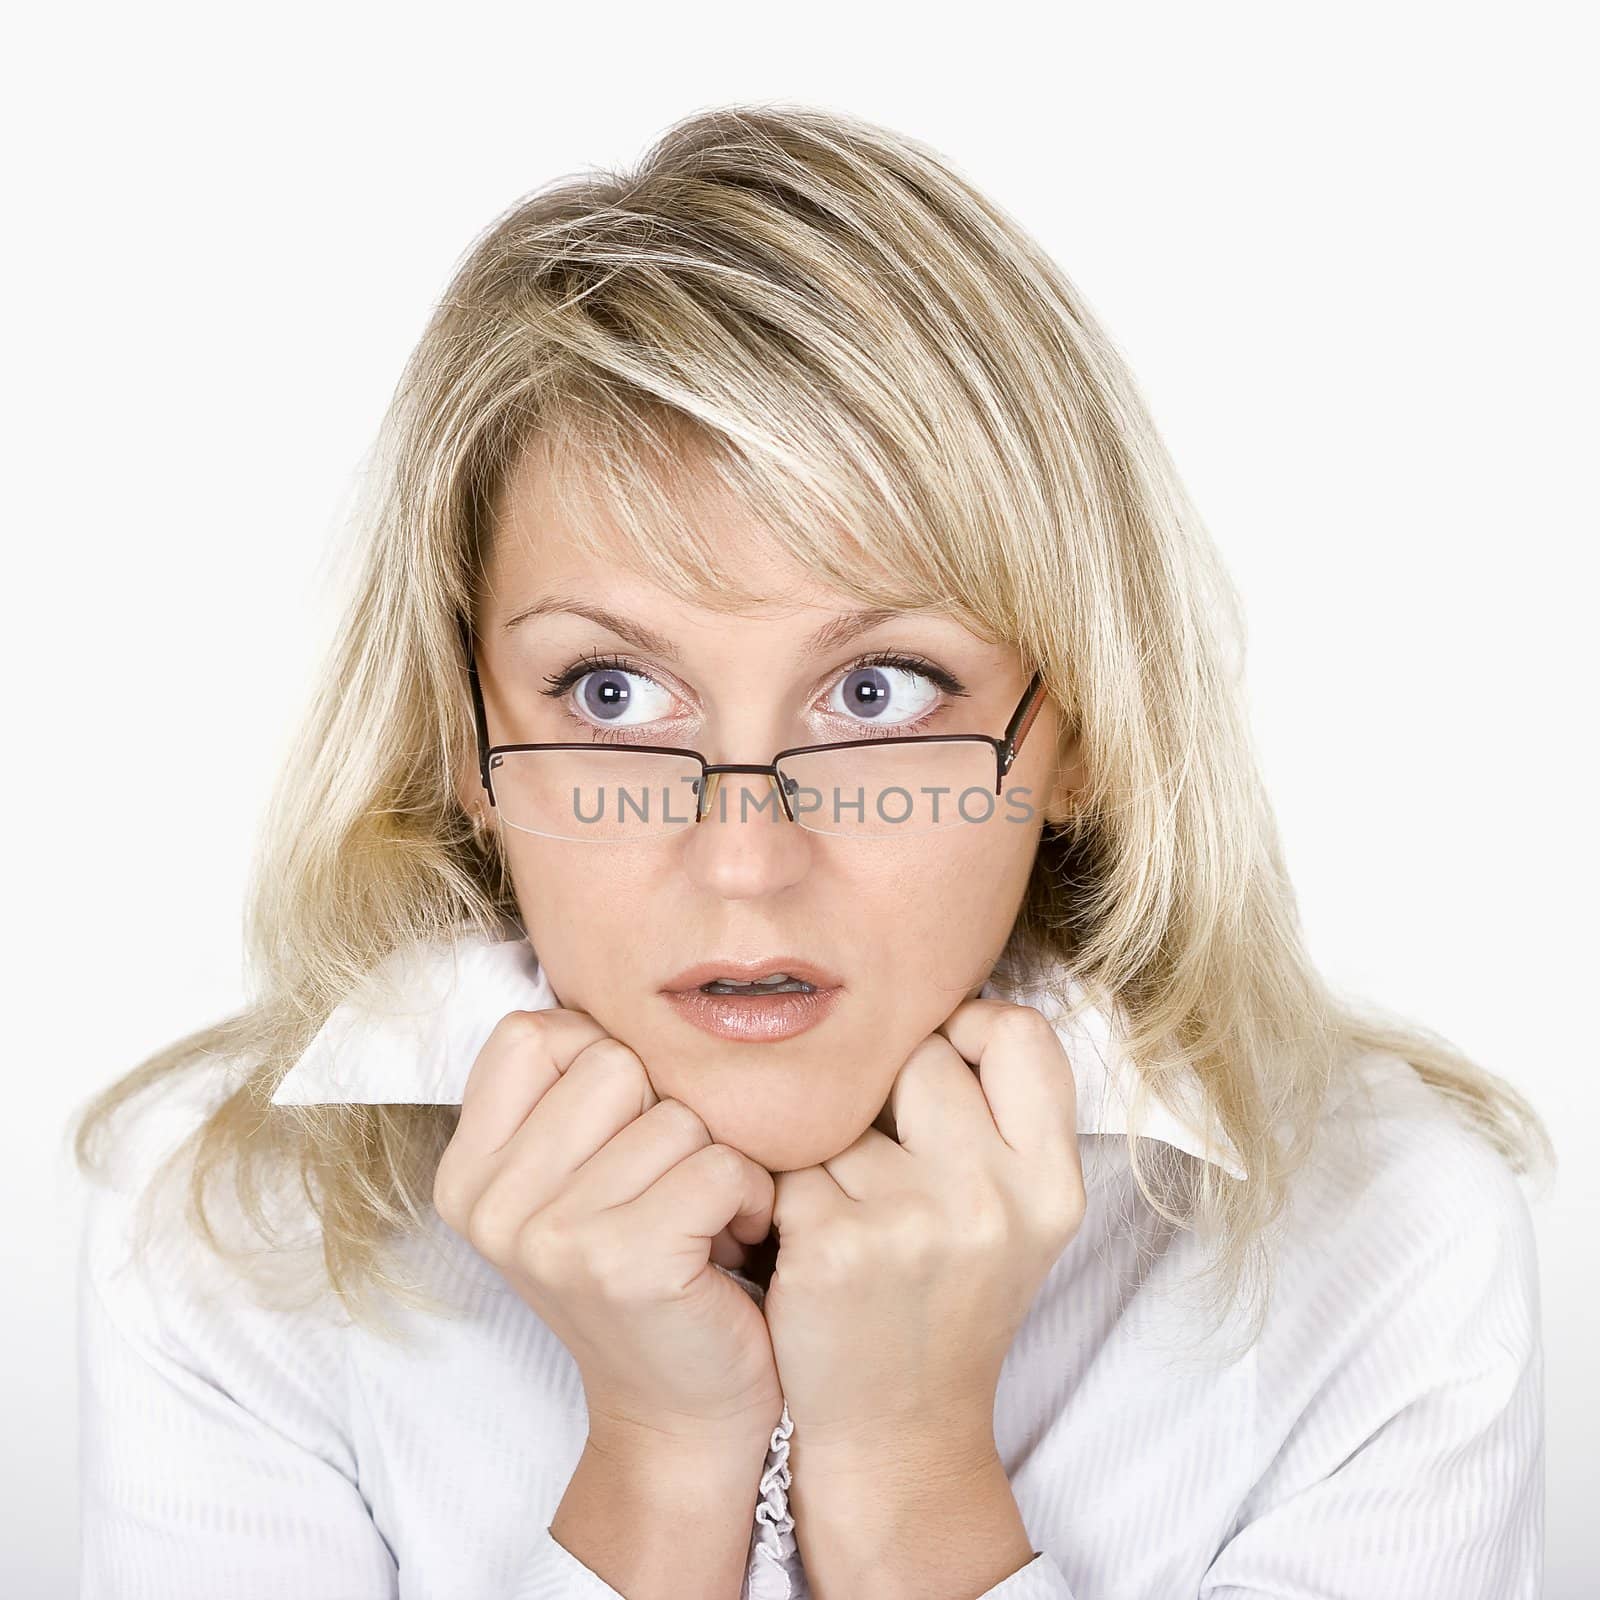 The uncombed scared business young woman in glasses